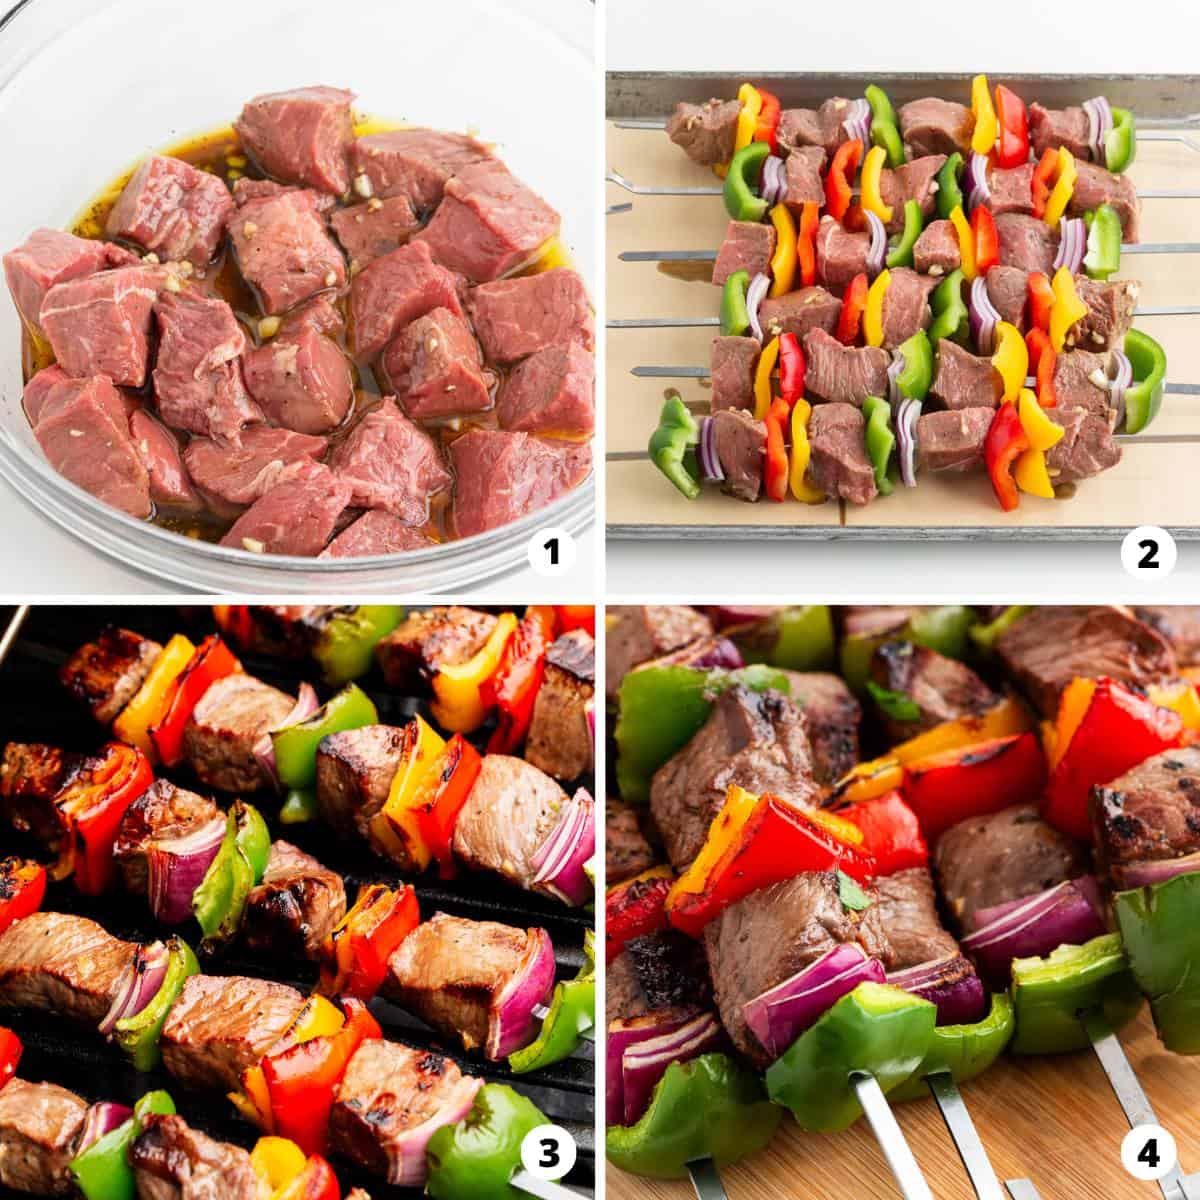 Showing how to make steak kabobs in a 4 step collage.